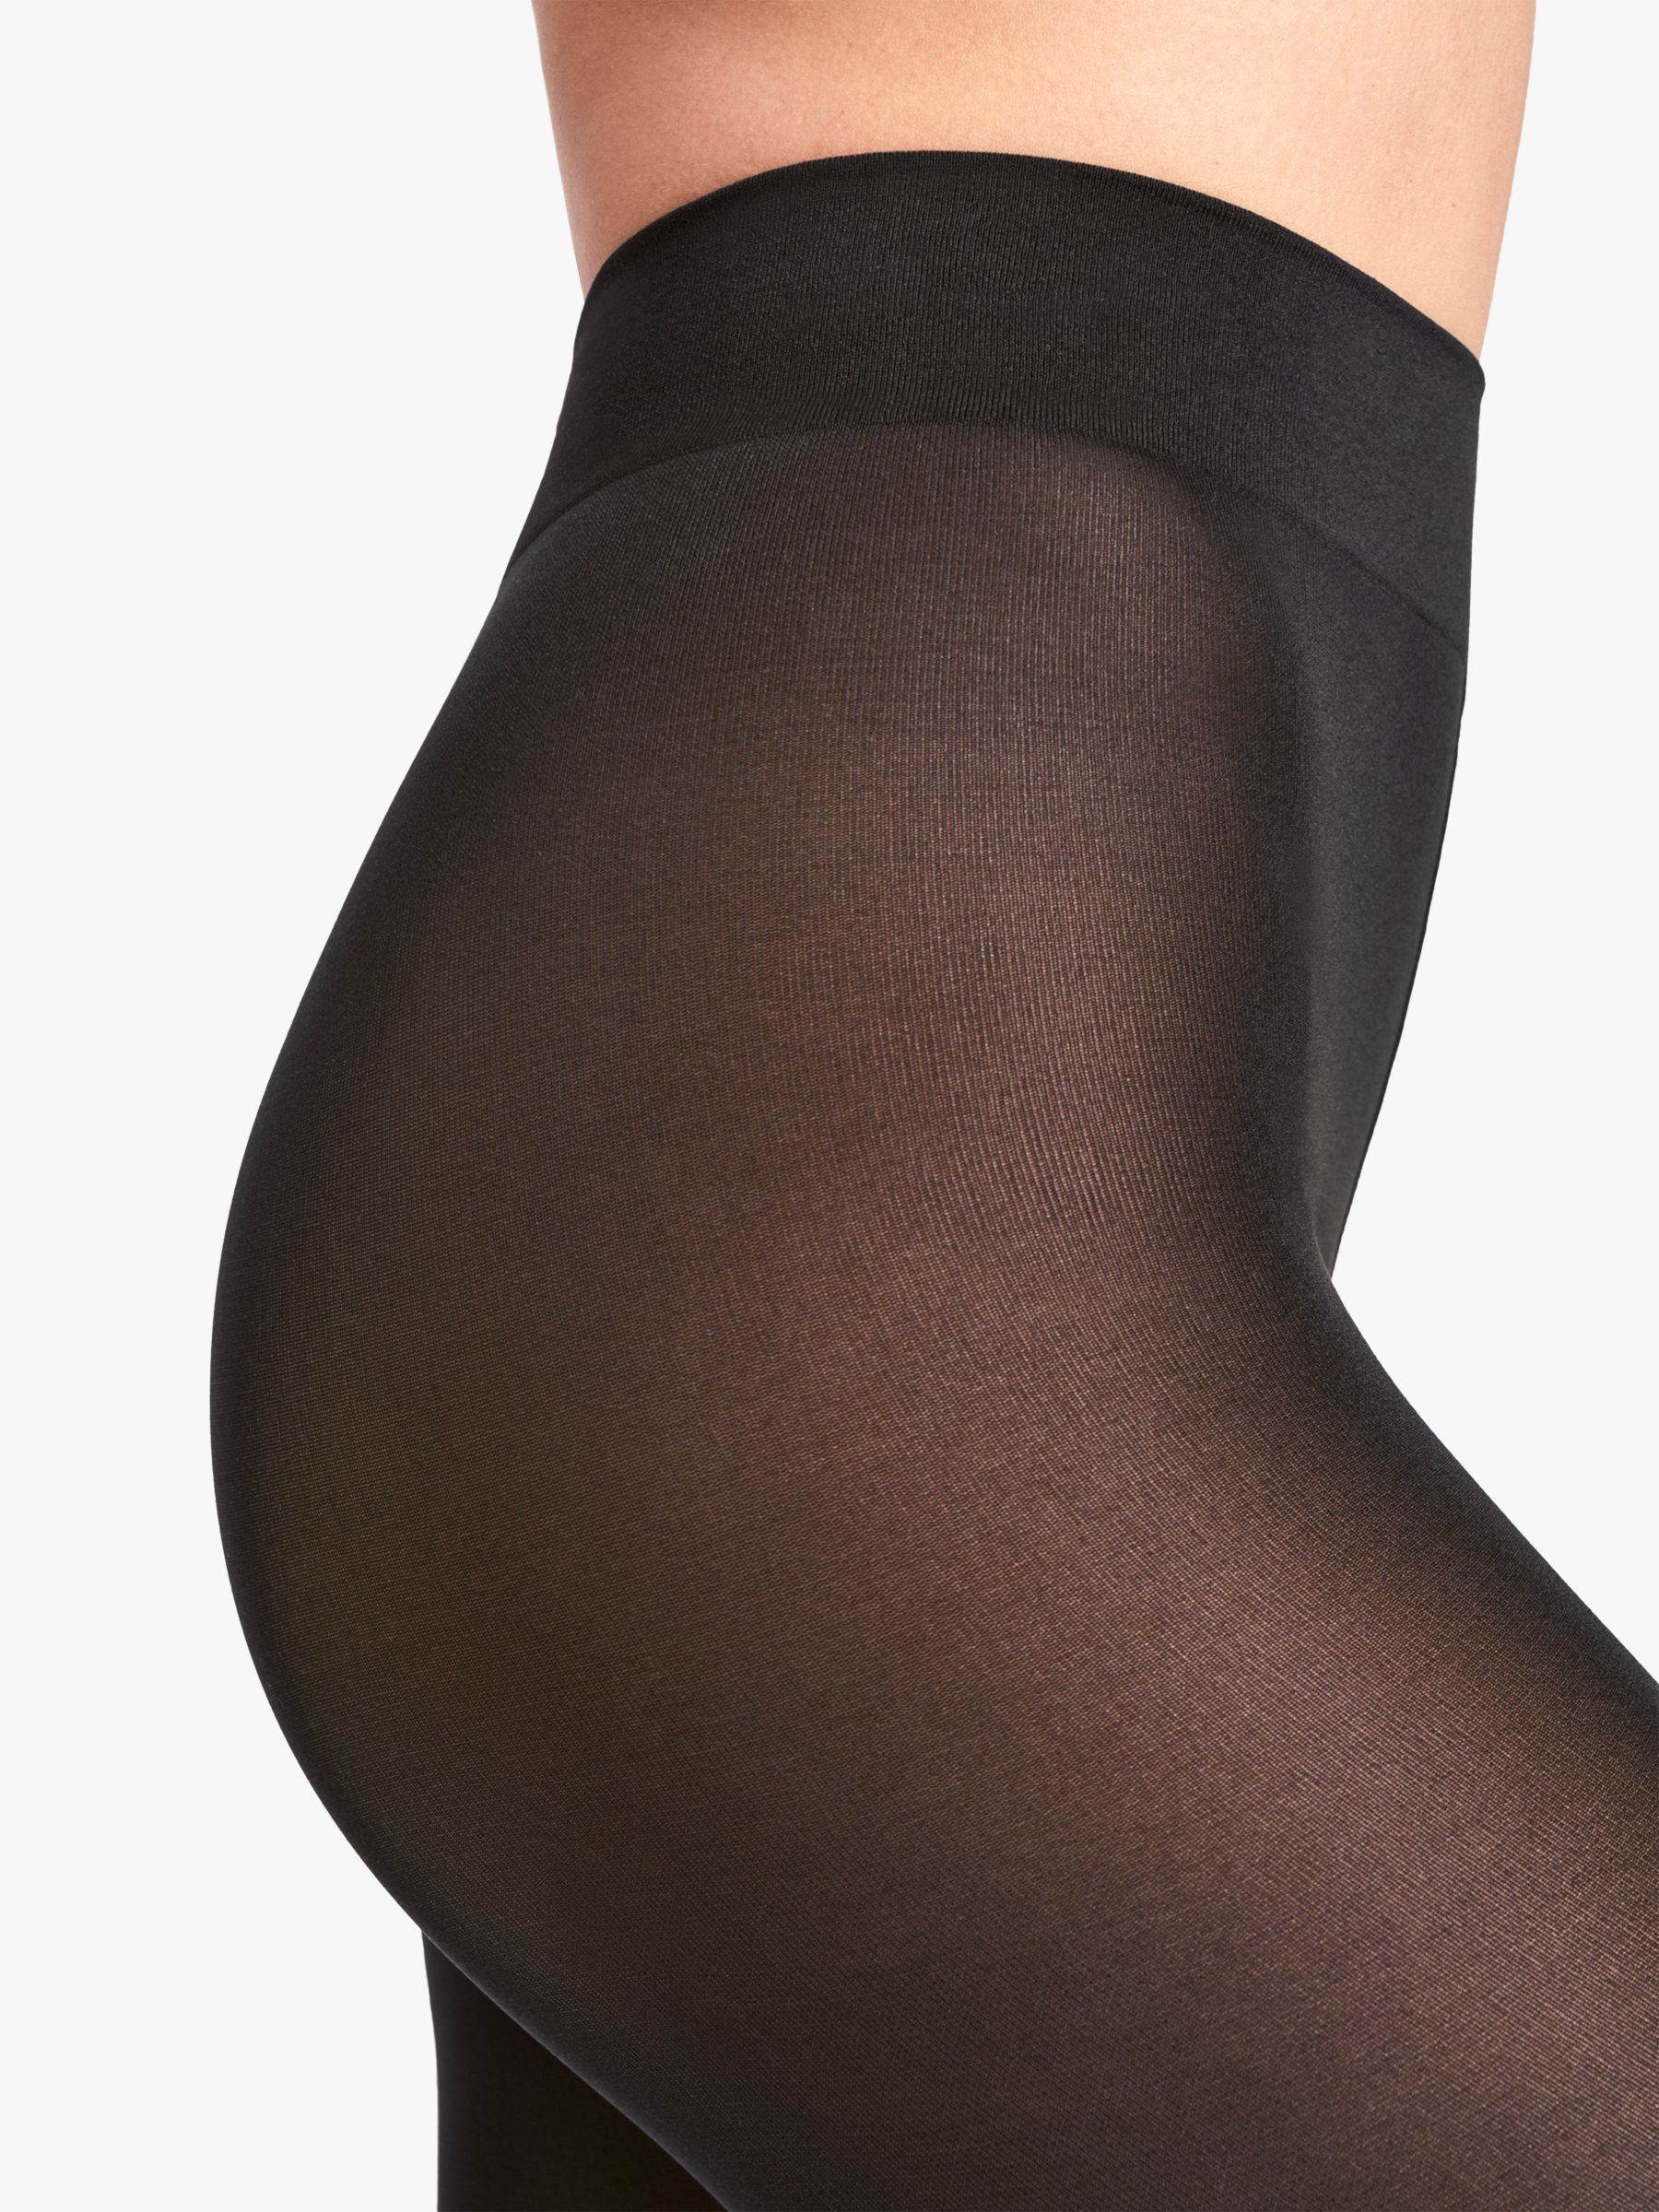 Wolford Velvet de Luxe 66 Opaque Tights, Black at John Lewis & Partners